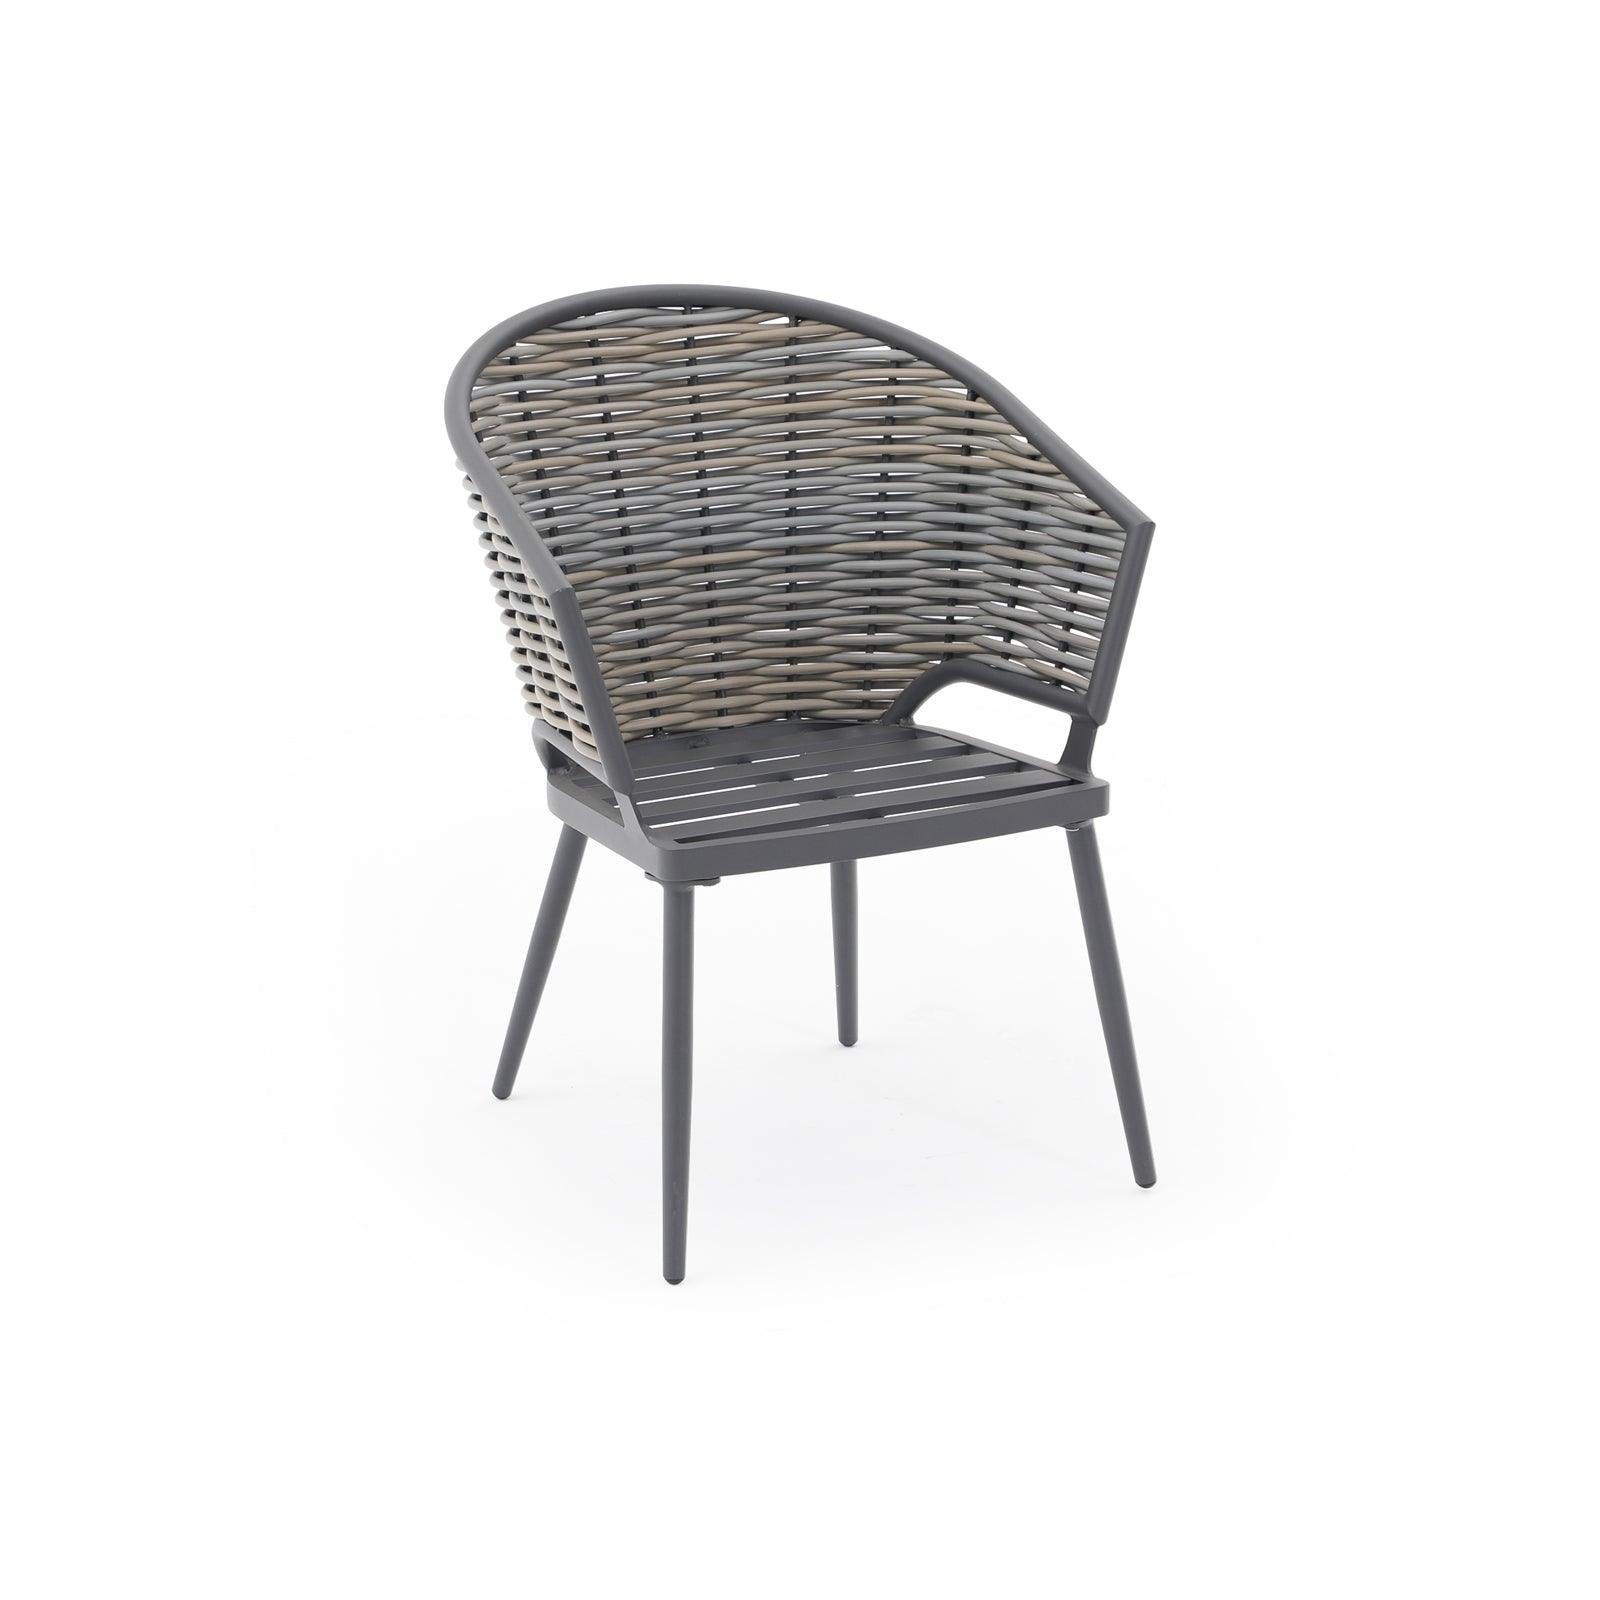 Burano Grey wicker outdoor Dining chairs with aluminum frame, right view- Jardina Furniture